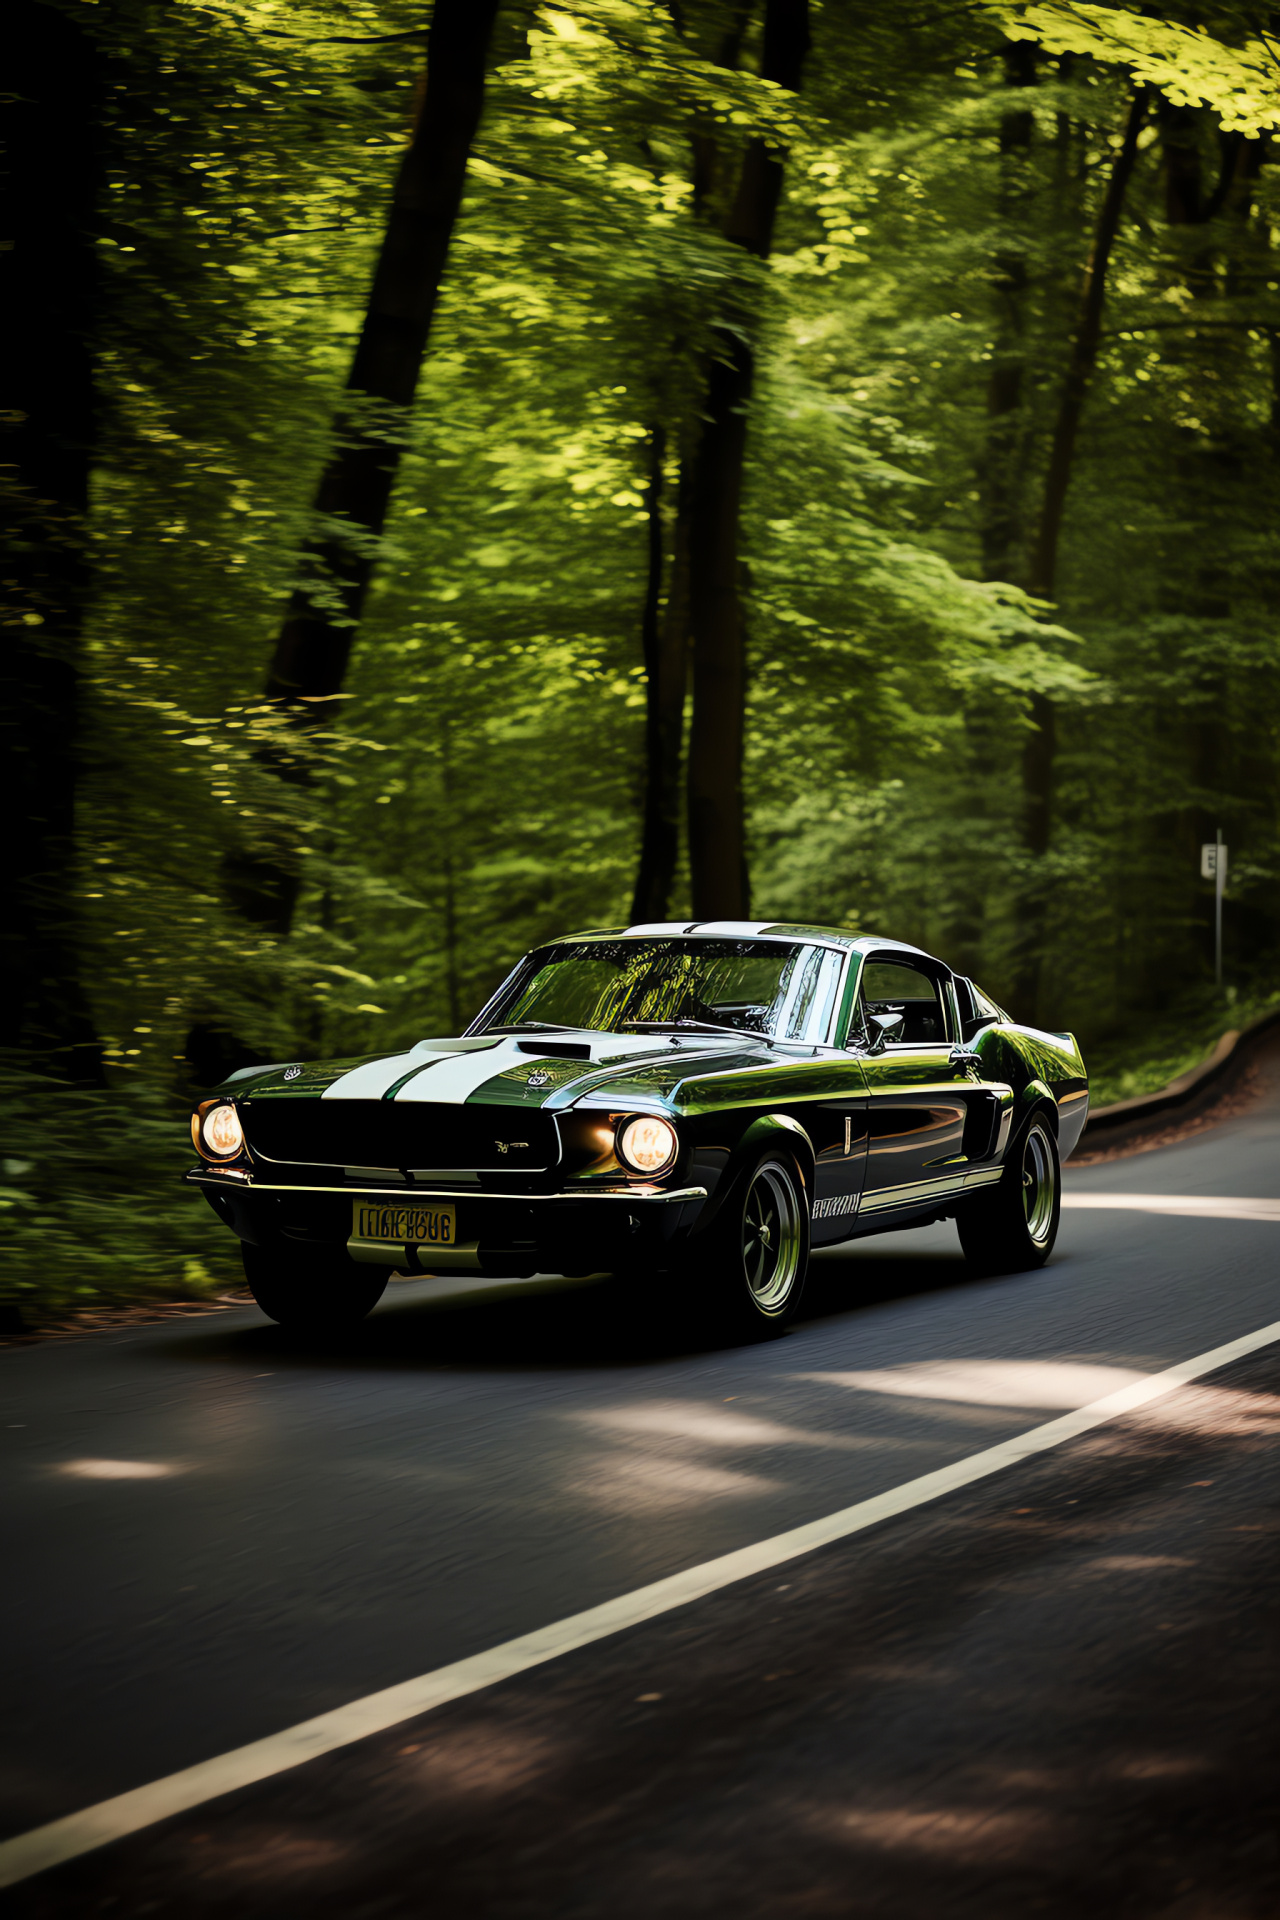 Muscle car at Nrburgring, Forest edge track, German engineering, Green lush background, Legendary racing, HD Phone Image